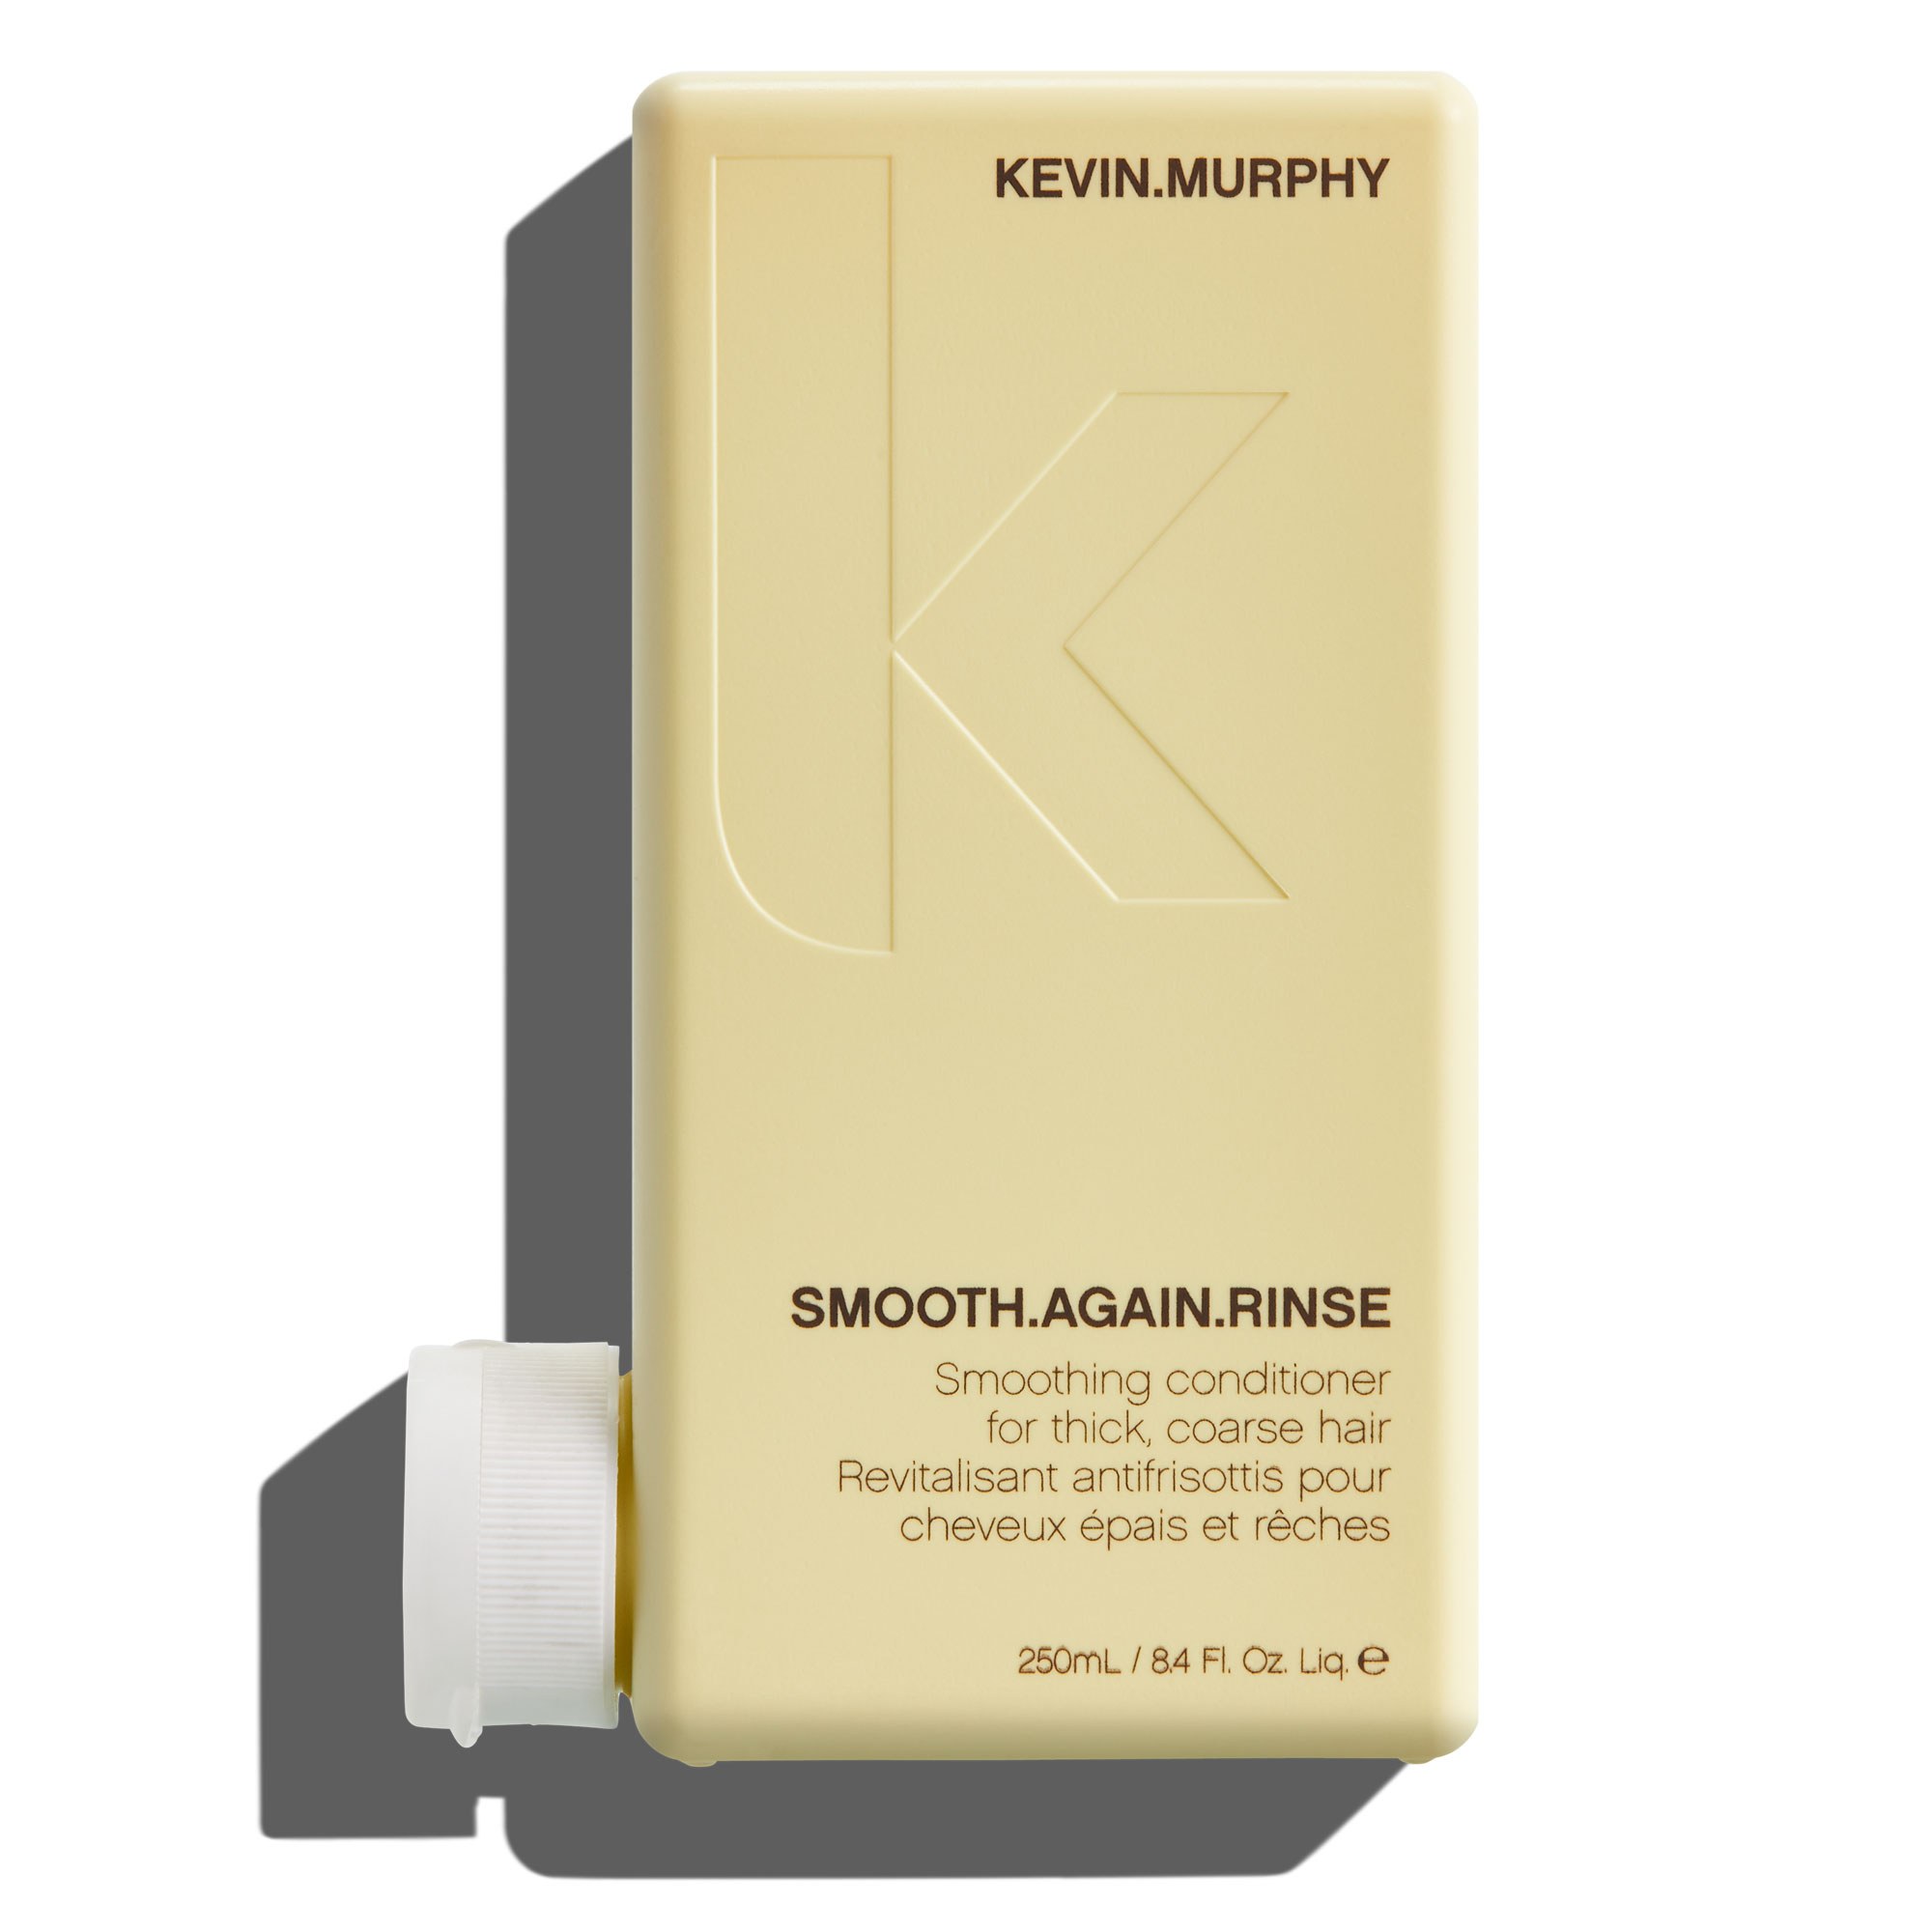 KEVIN.MURPHY SMOOTH.AGAIN Rinse